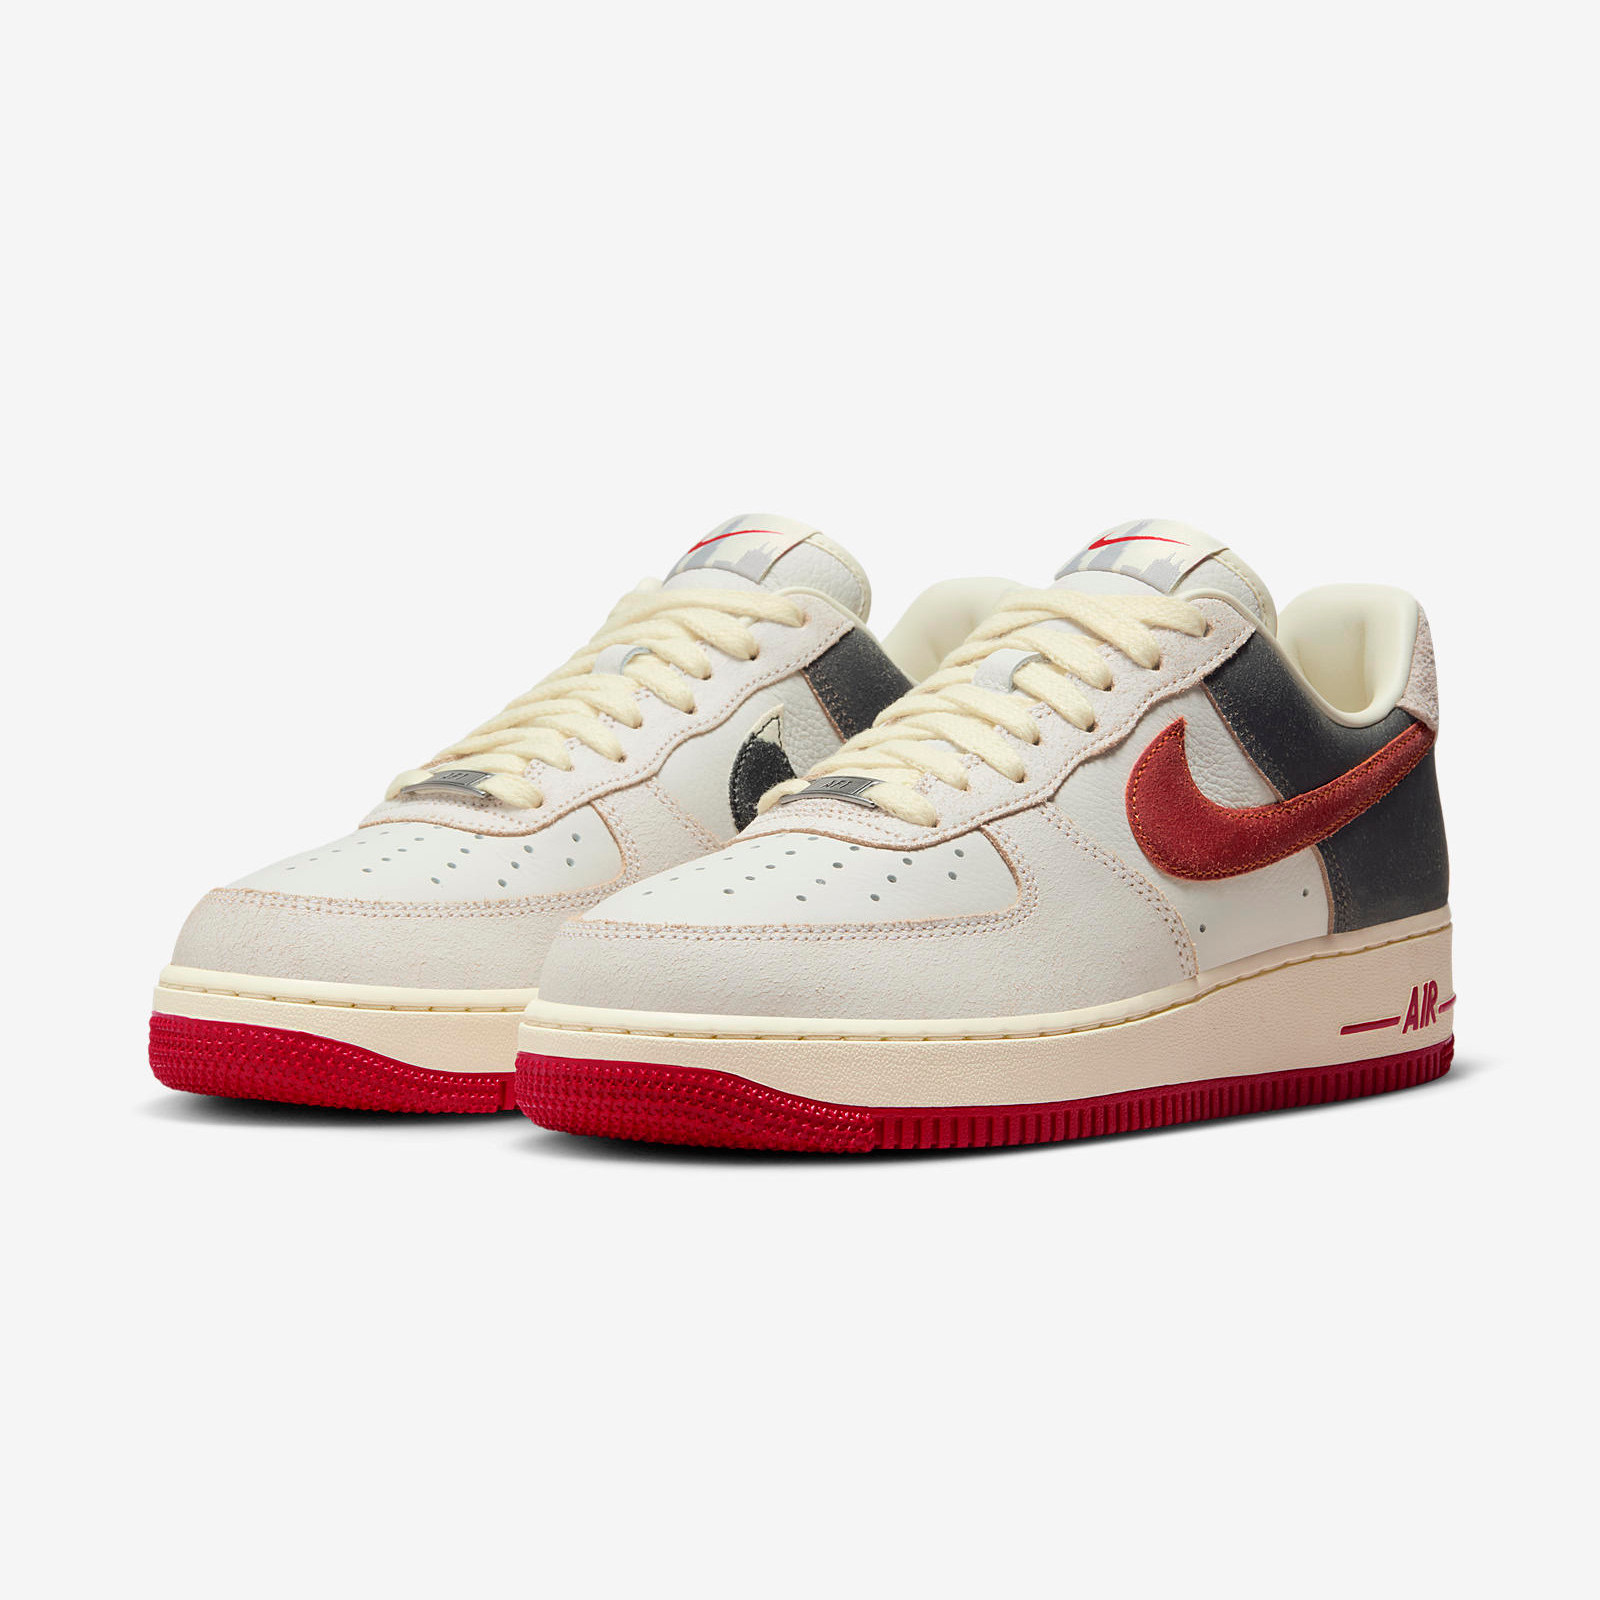 Nike Air Force 1 07
« Chicago »